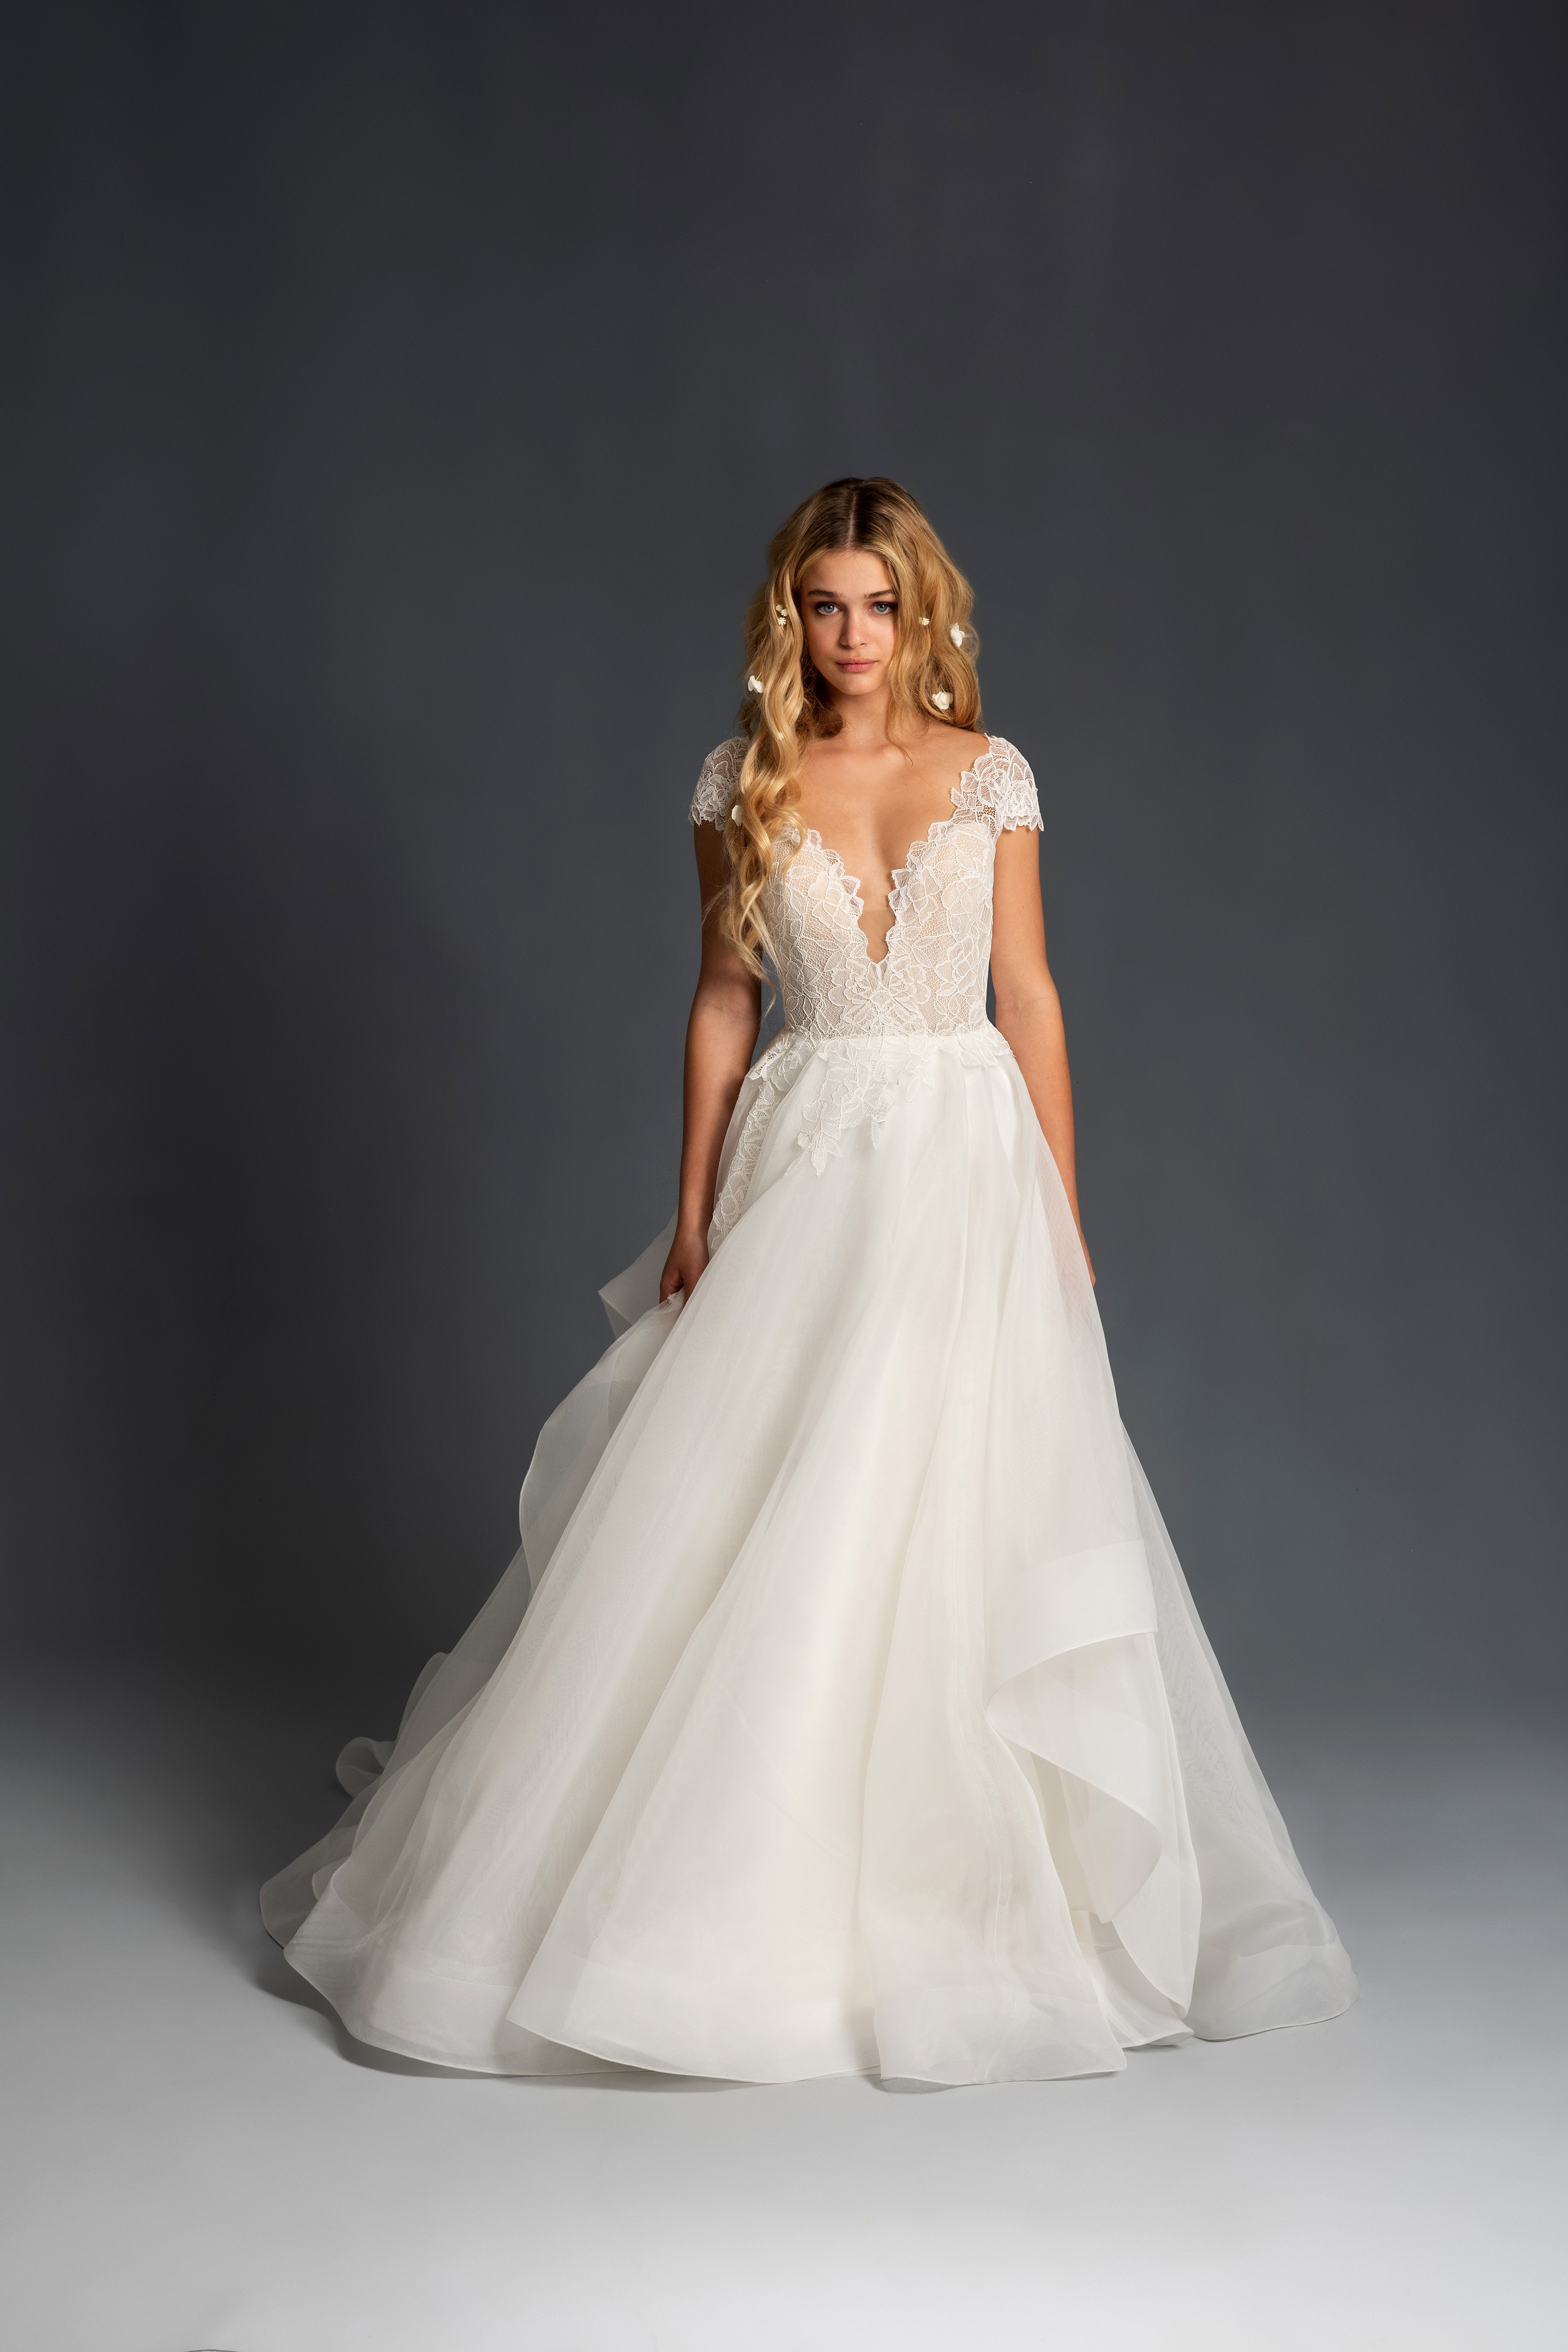  Blush  by Hayley Paige Spring 2020  Wedding  Dress  Collection 